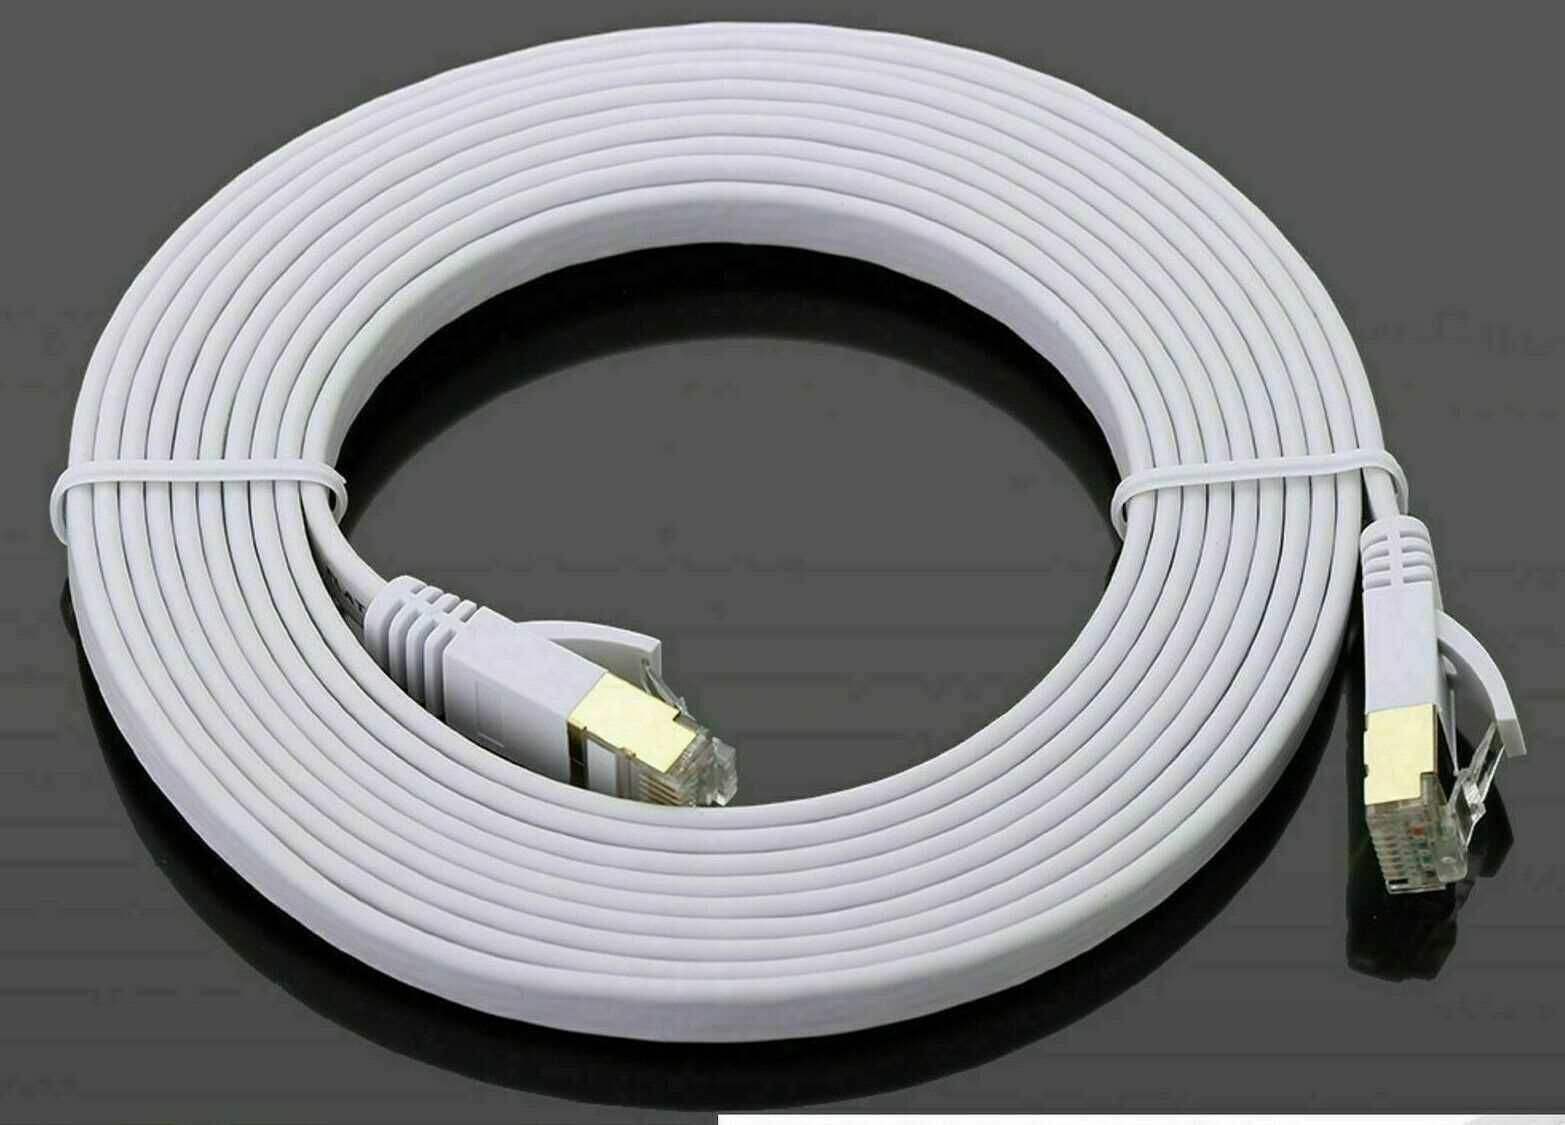 10M White Flat CAT8 Ethernet Cable RJ45 Network SSTP Gold Ultra-Thin 40GBPS LAN Lead Cable